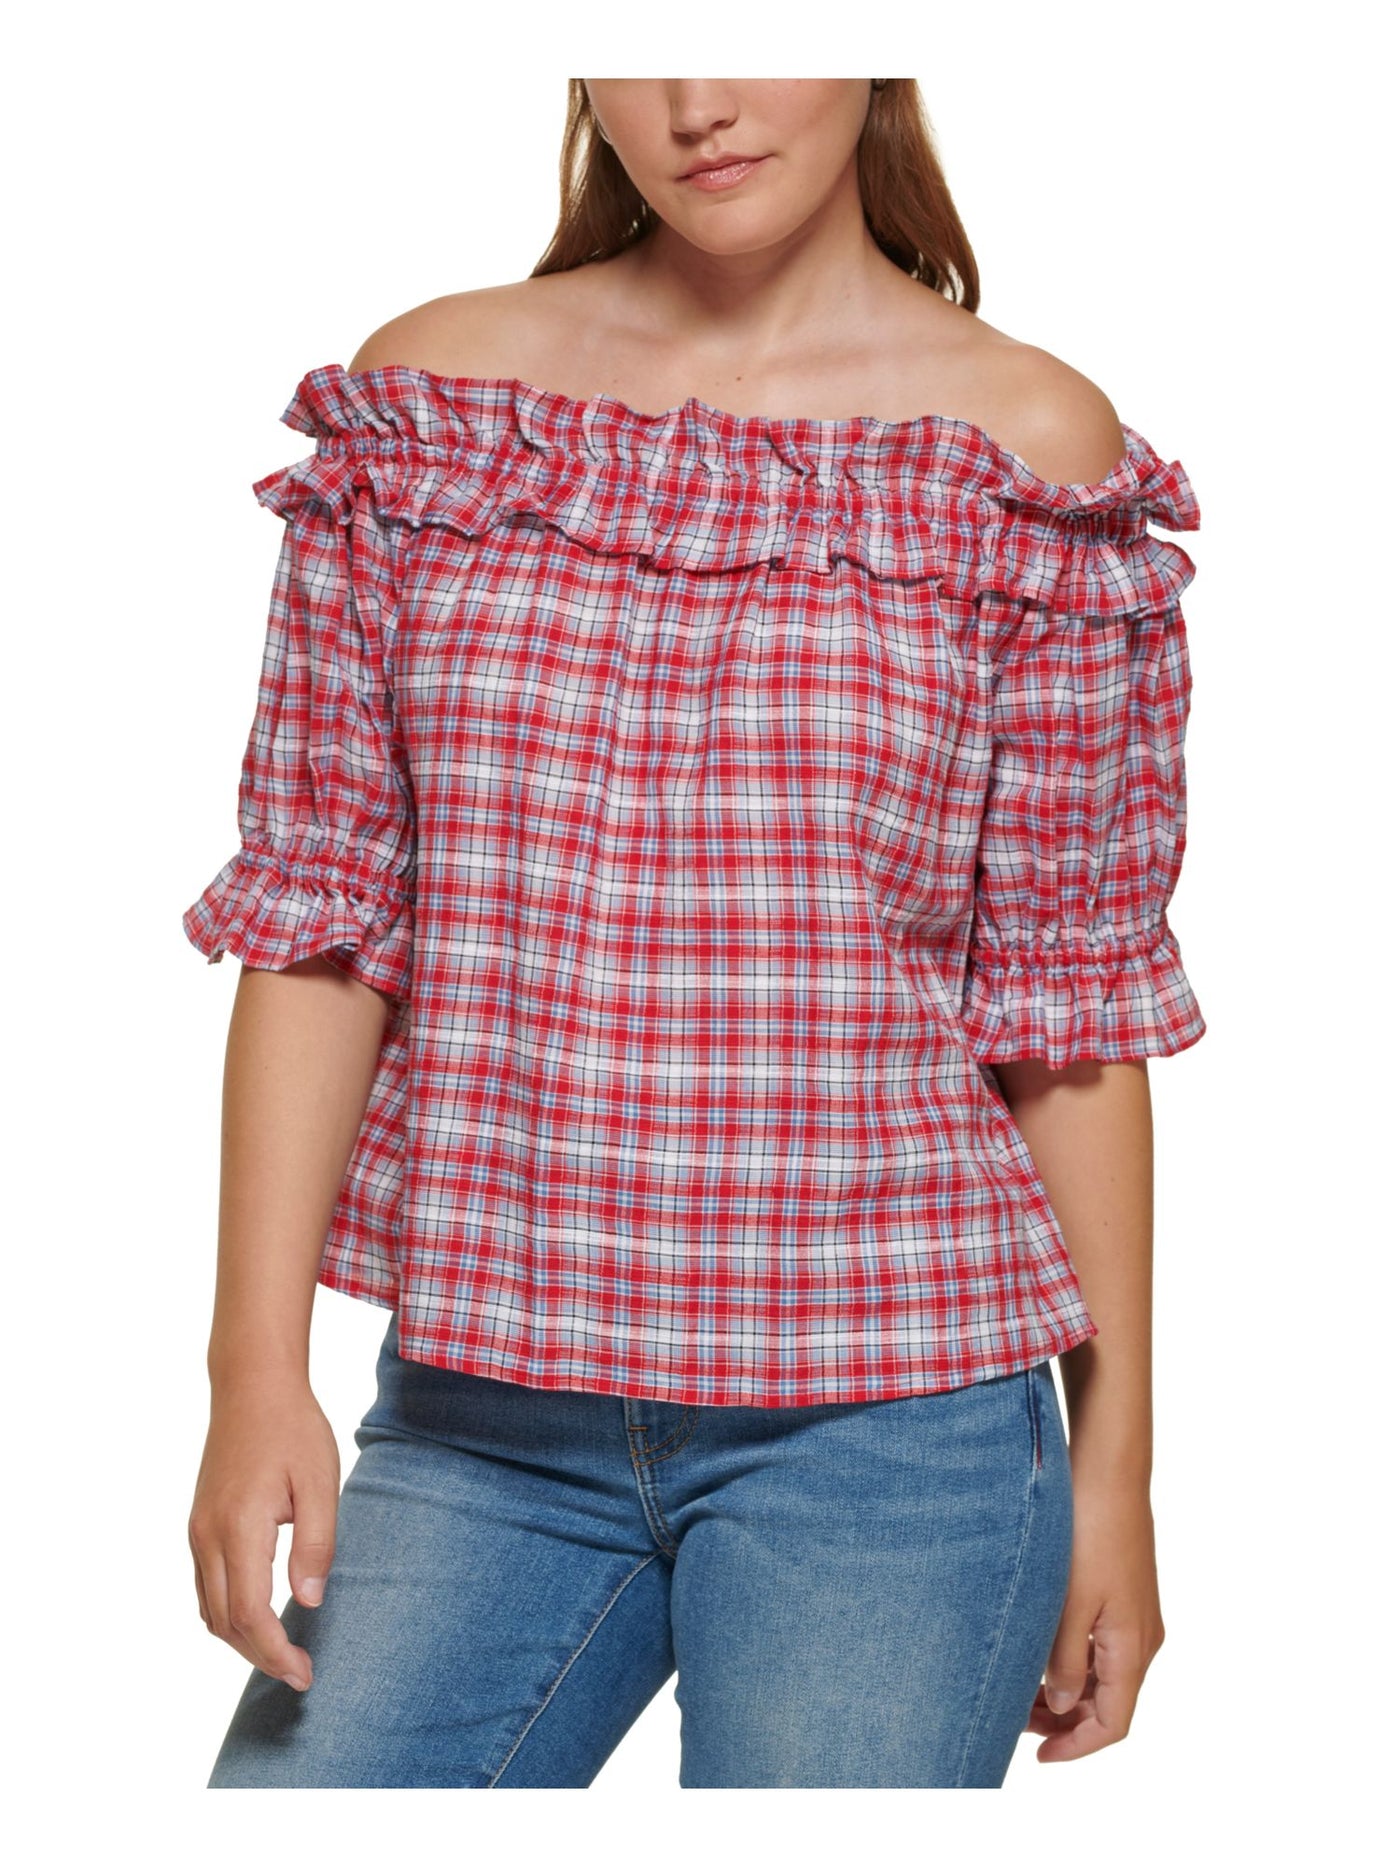 TOMMY HILFIGER Womens Red Ruffled Pullover Plaid Elbow Sleeve Off Shoulder Top XL